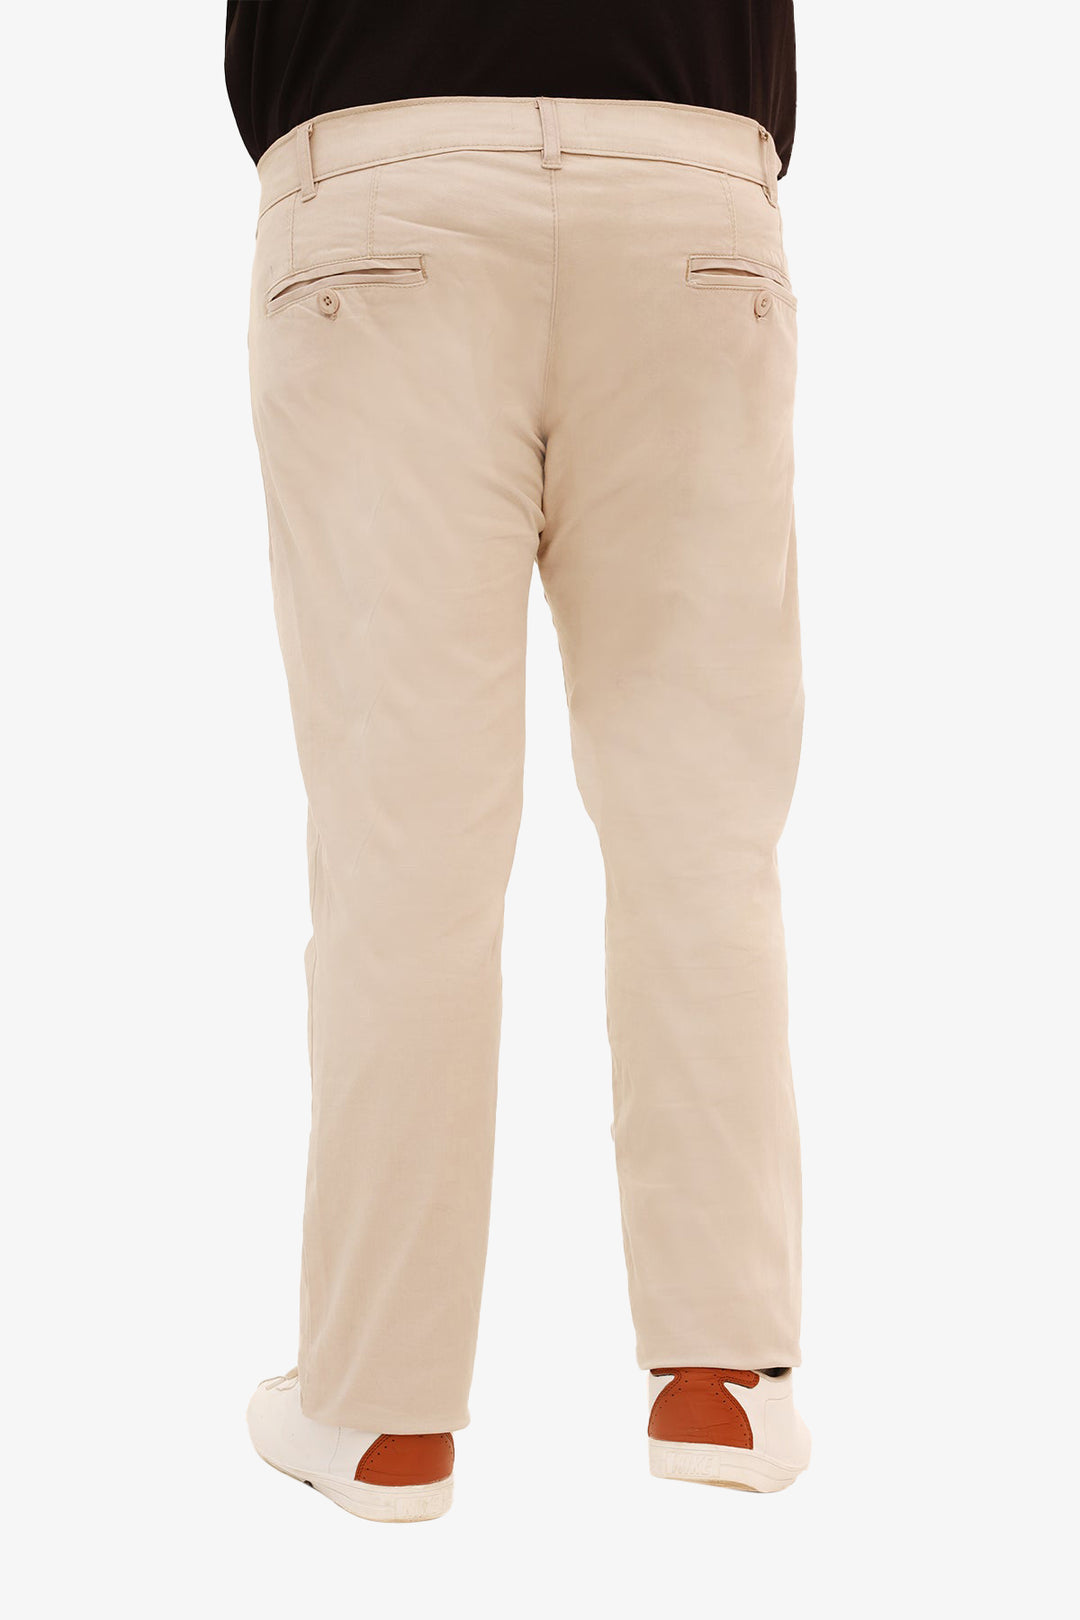 Taupe Stretchy Cotton Chinos (Plus Size) - S22 - MC0020P